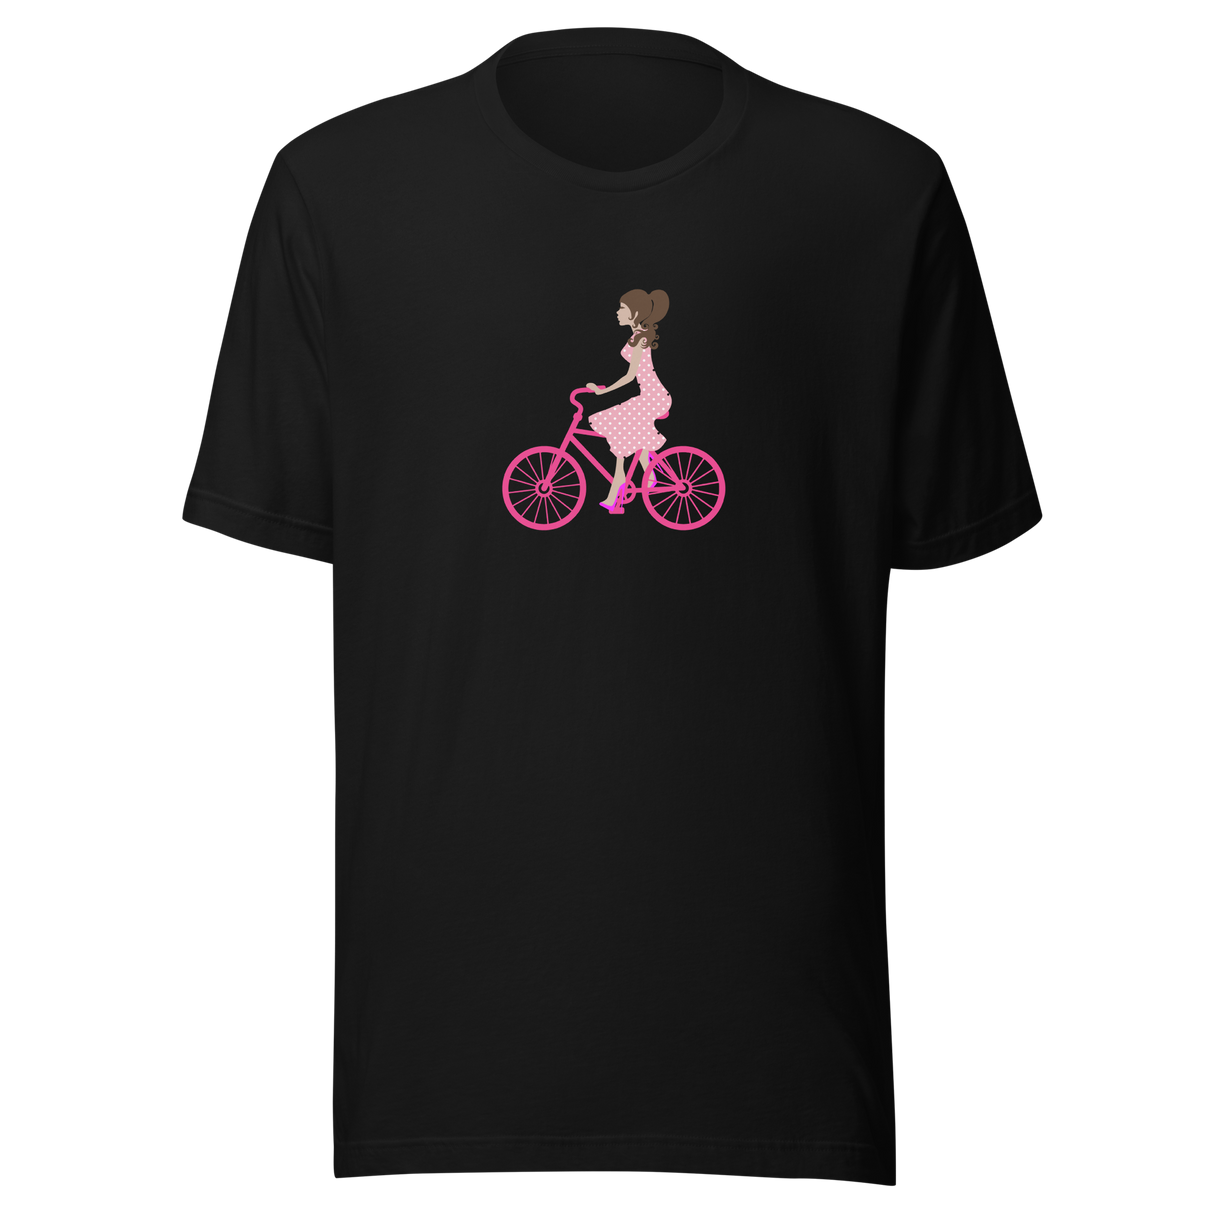 lady-in-pink-dress-riding-pink-bicycle-bicycle-tee-bike-t-shirt-lady-tee-gift-t-shirt-mom-tee#color_black